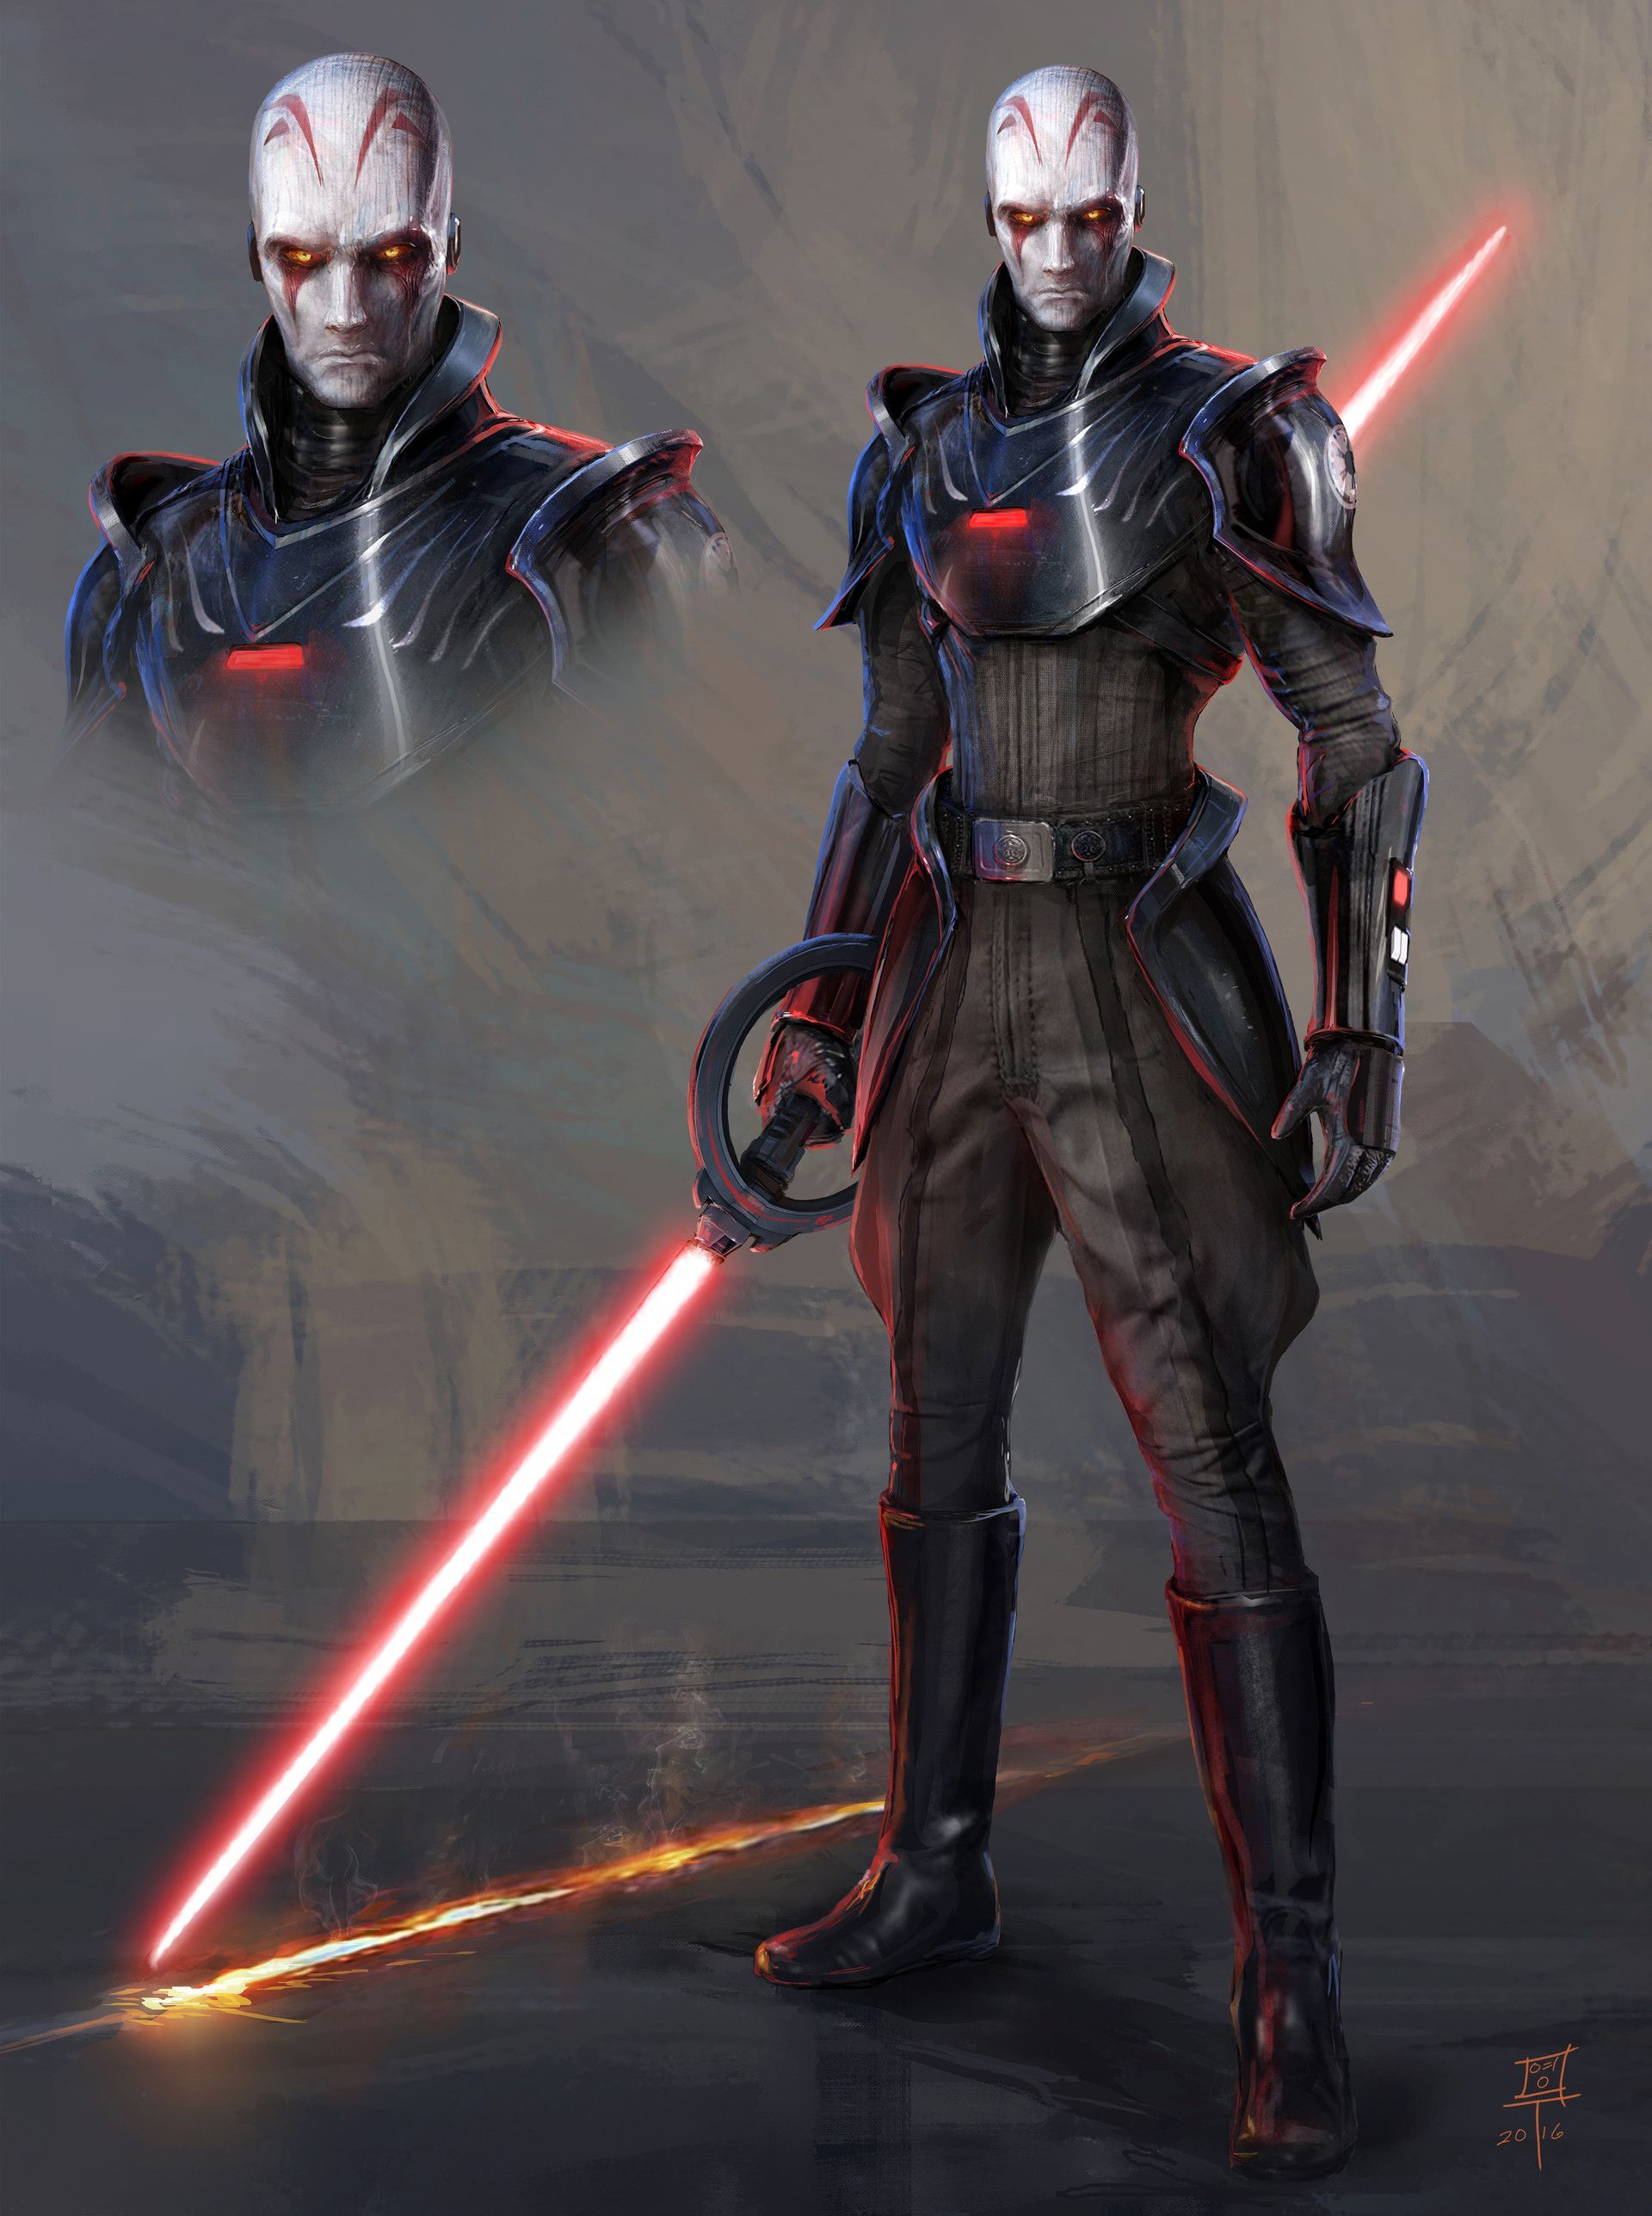 The Inquisitor (Rebels), MuYoung Kim. Star wars villains, Star wars characters picture, Star wars picture